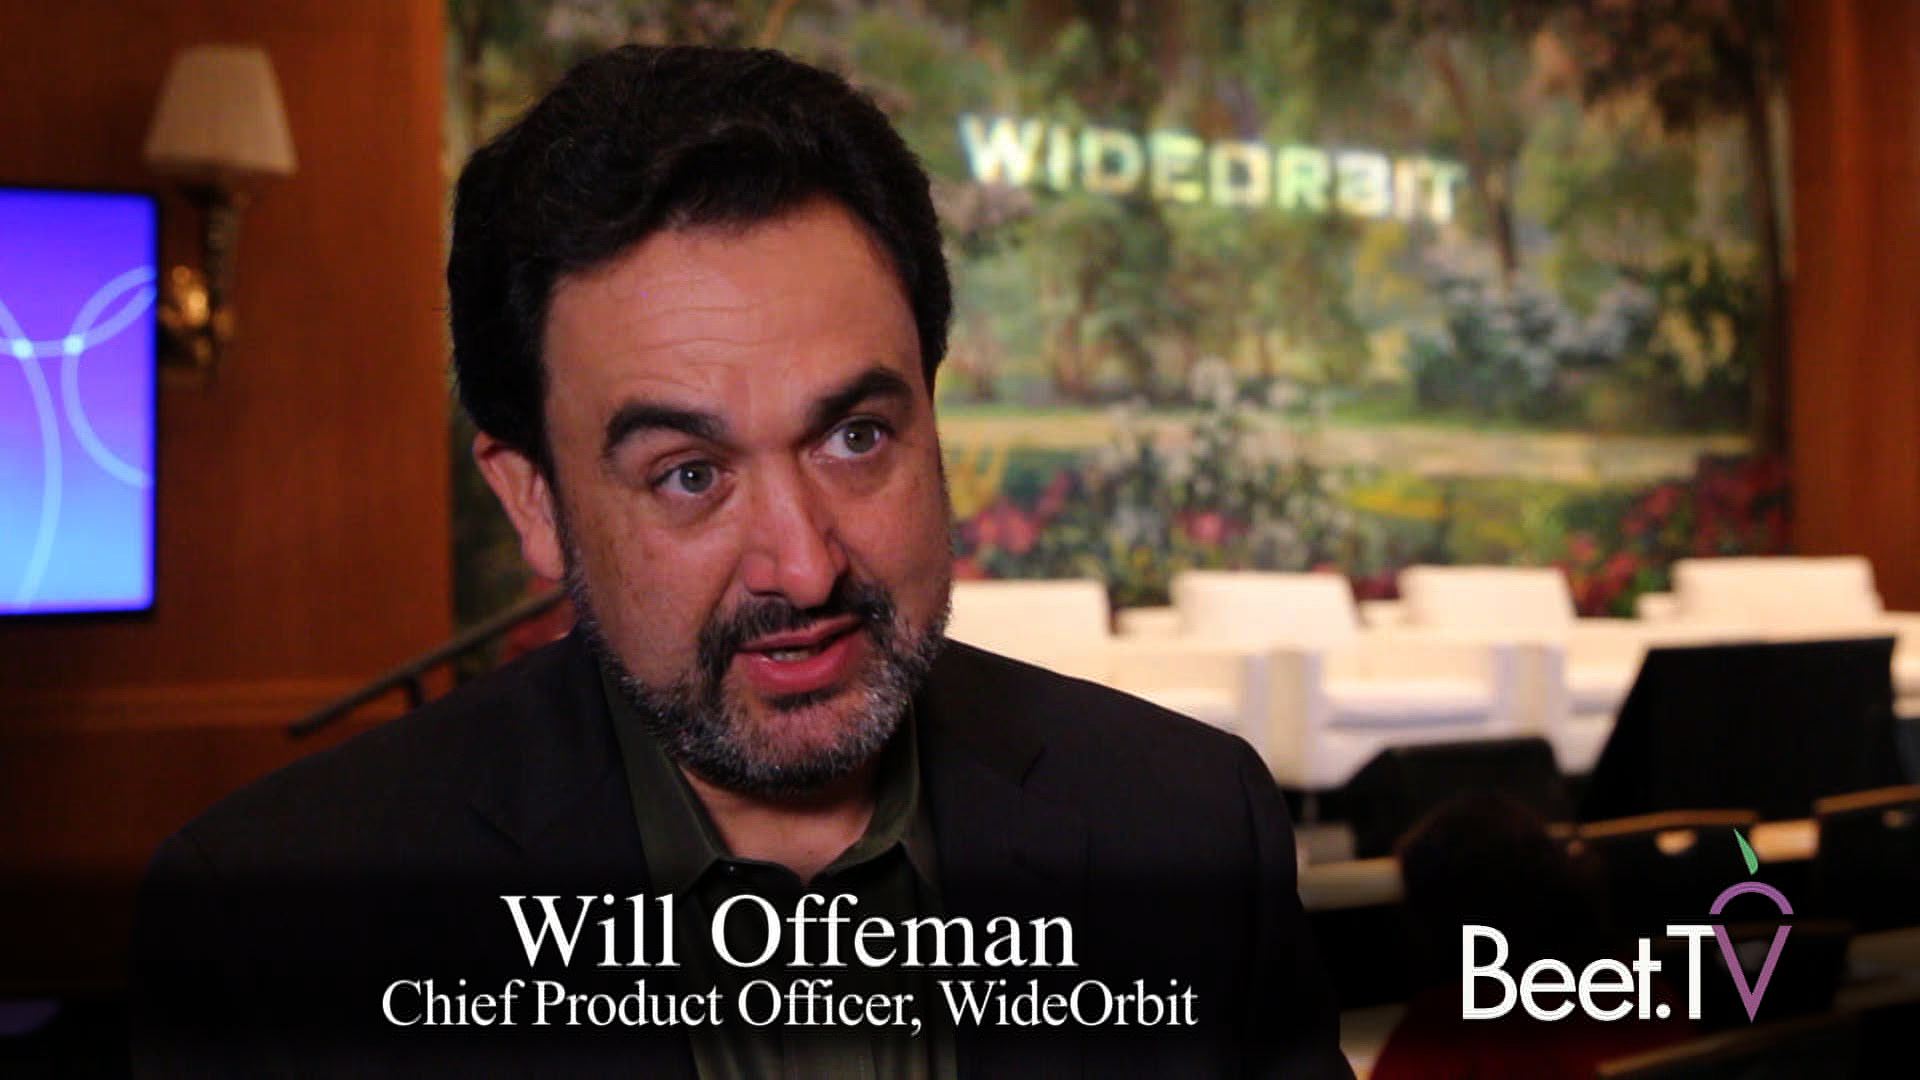 WideOrbit’s 2019 Focus: Open Systems, Digital-Linear Convergence And Data Science